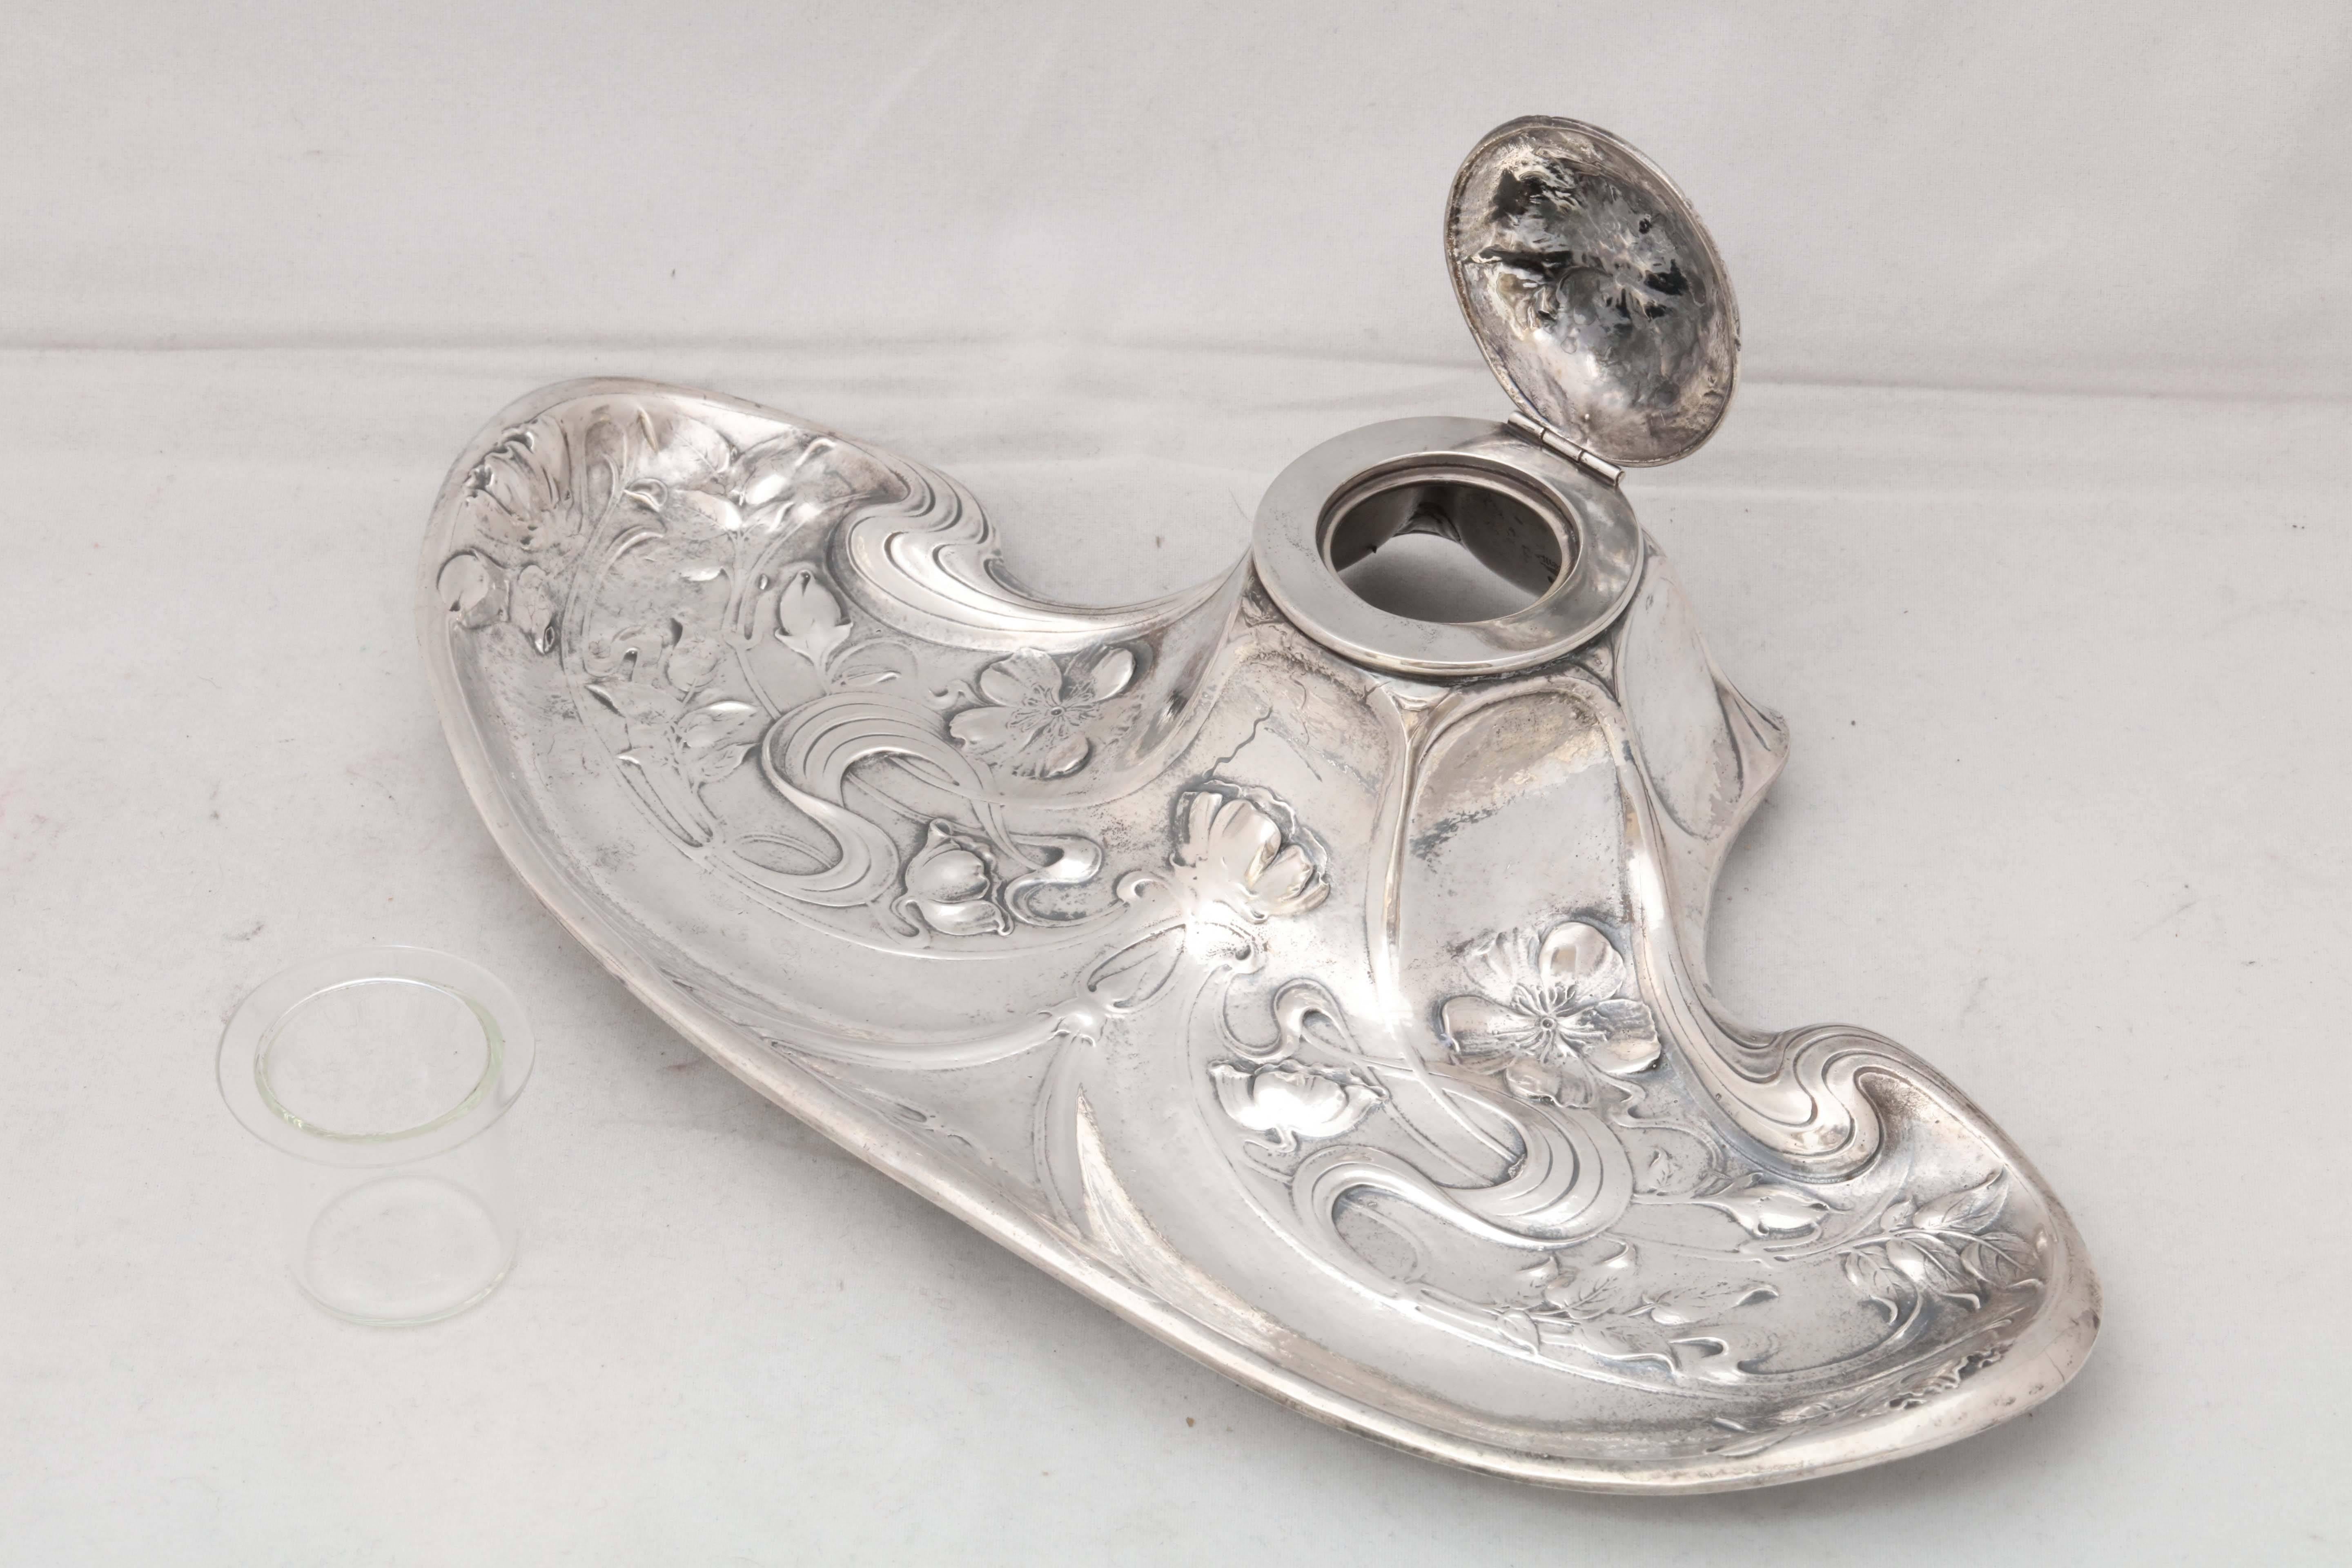 Rare Sterling Silver Art Nouveau Gorham Martele Footed Inkstand with Hinged Lid In Excellent Condition For Sale In New York, NY